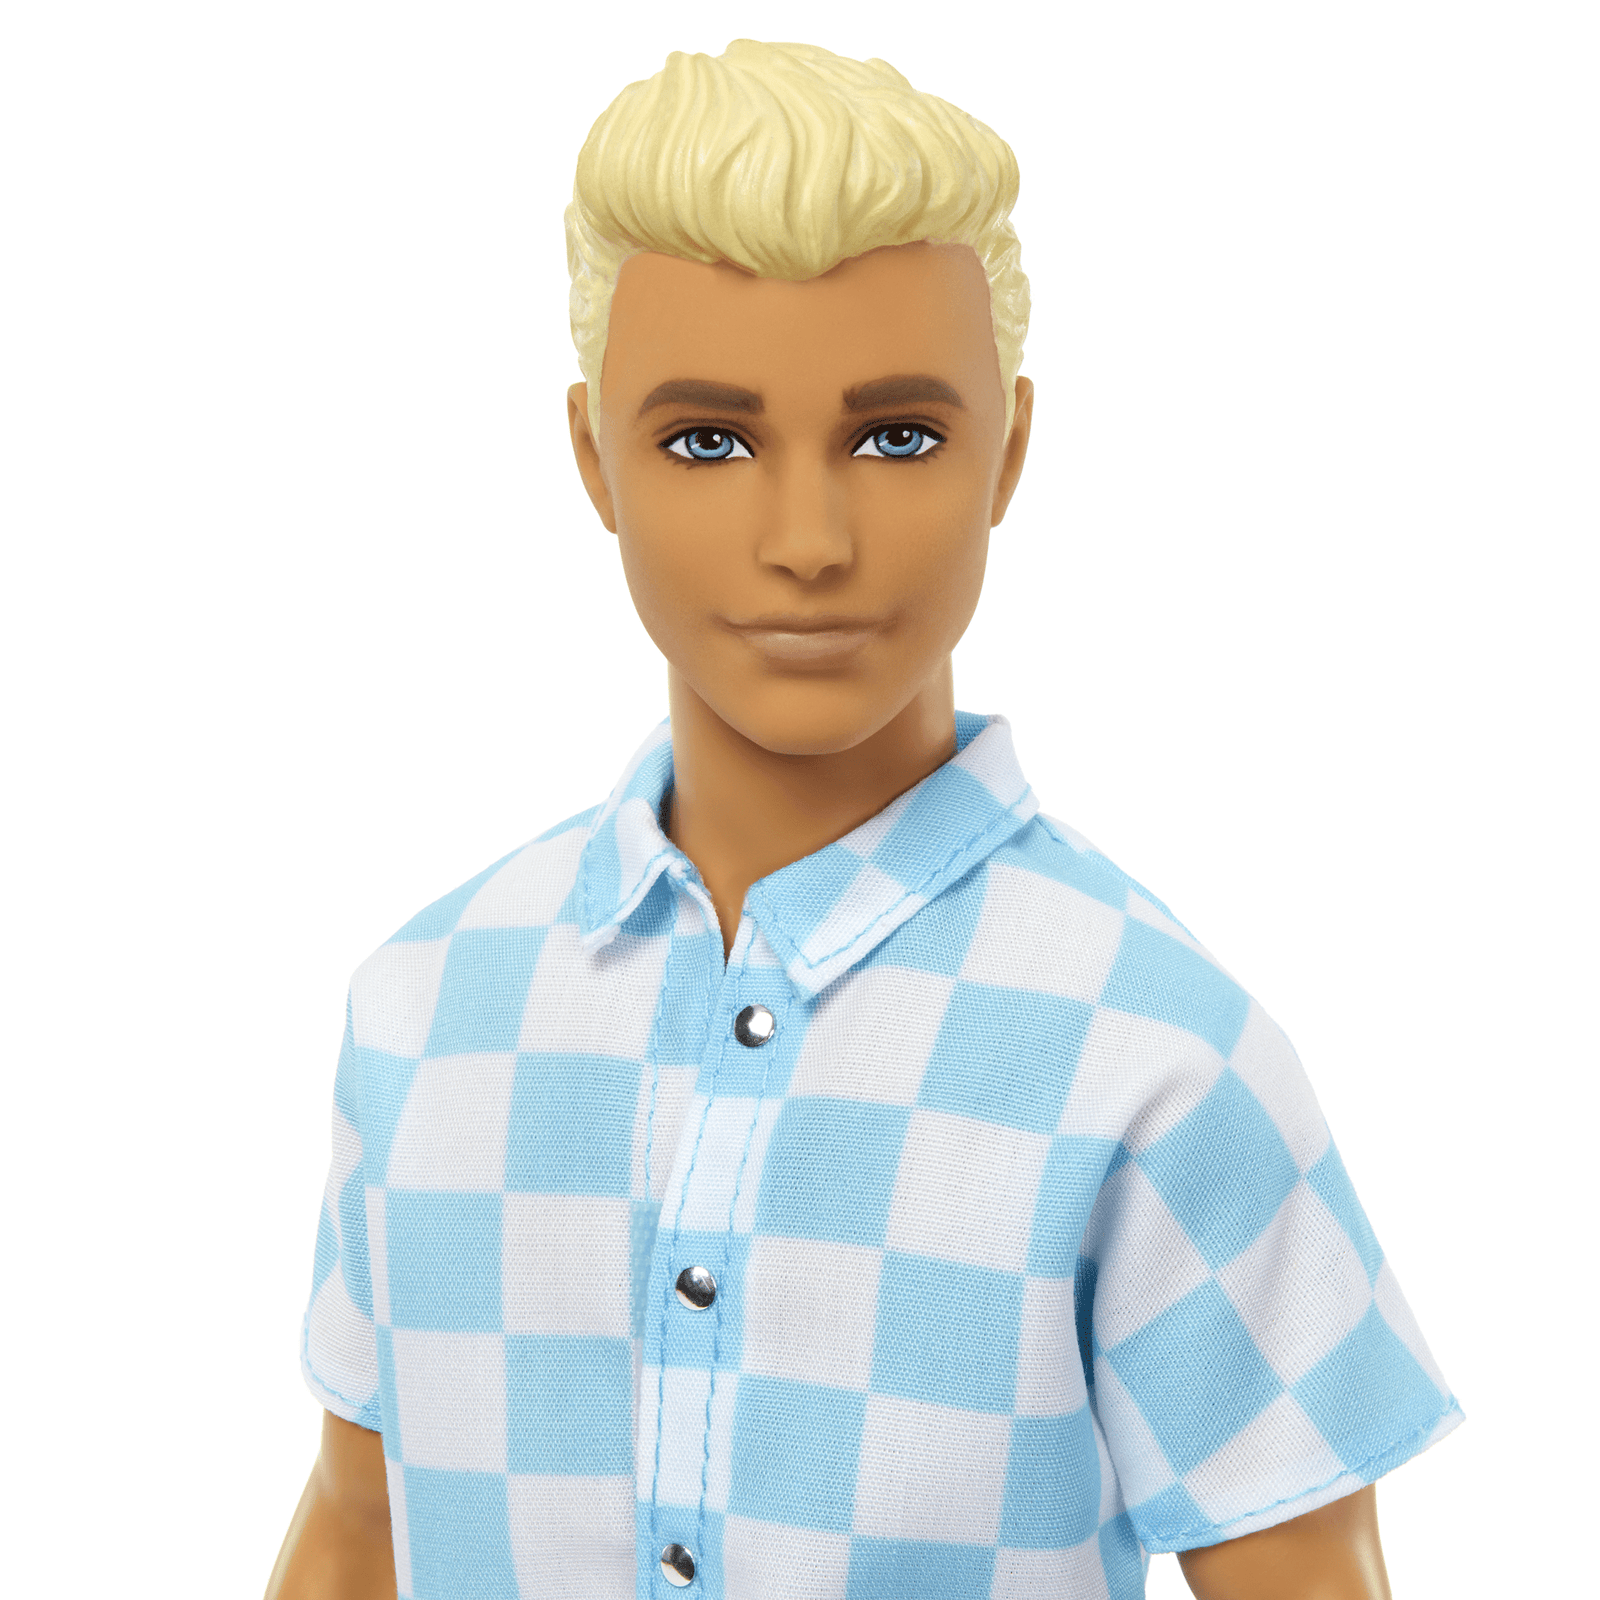 Barbie Blonde Ken Doll with Swim Trunks and Beach-Themed Accessories